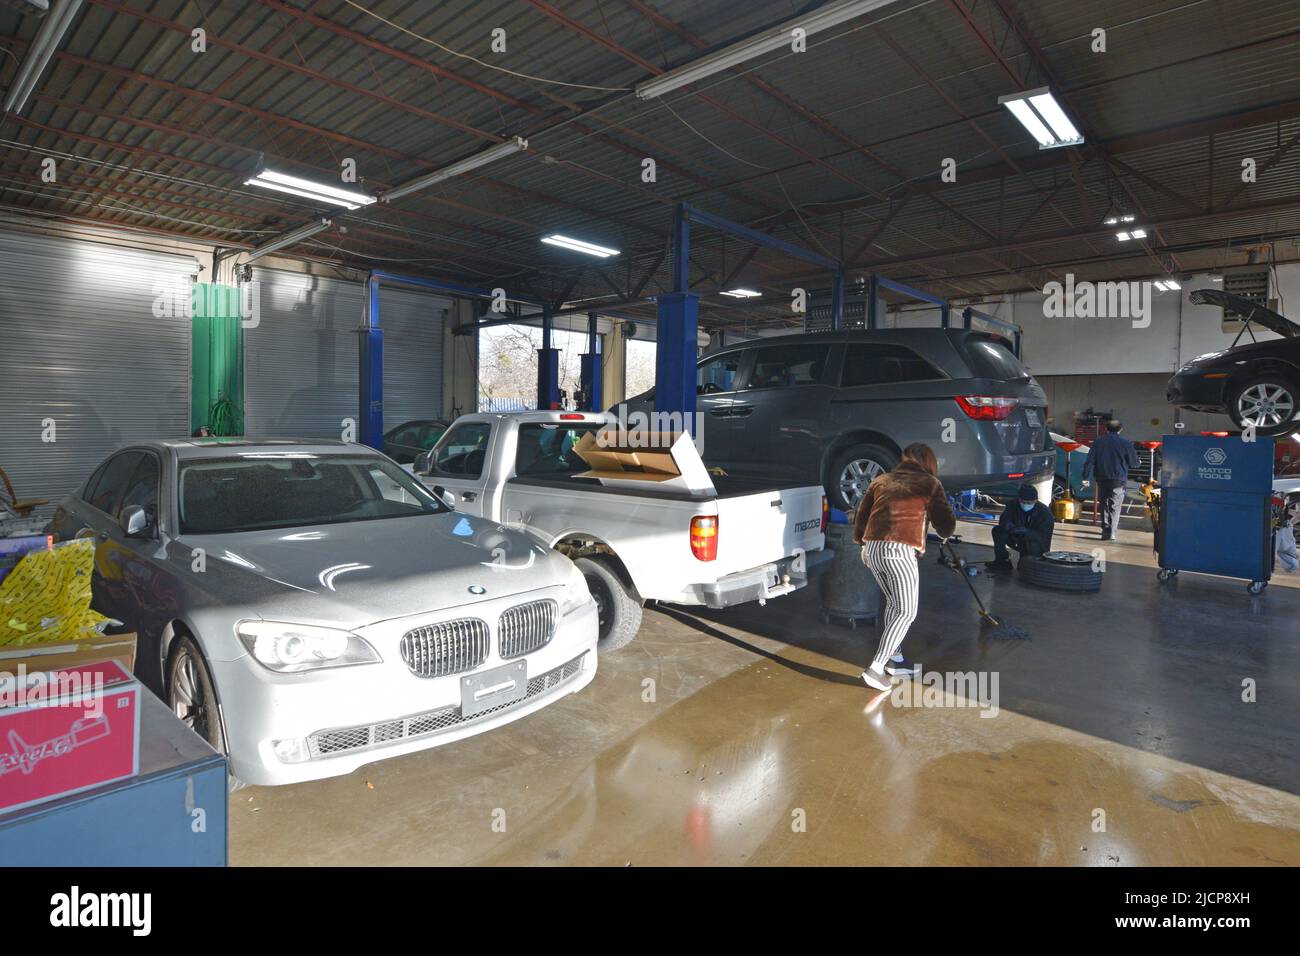 Woman mopping floor in an area of a car repair shop, cars on a rack or hydraulic lift in the background Stock Photo